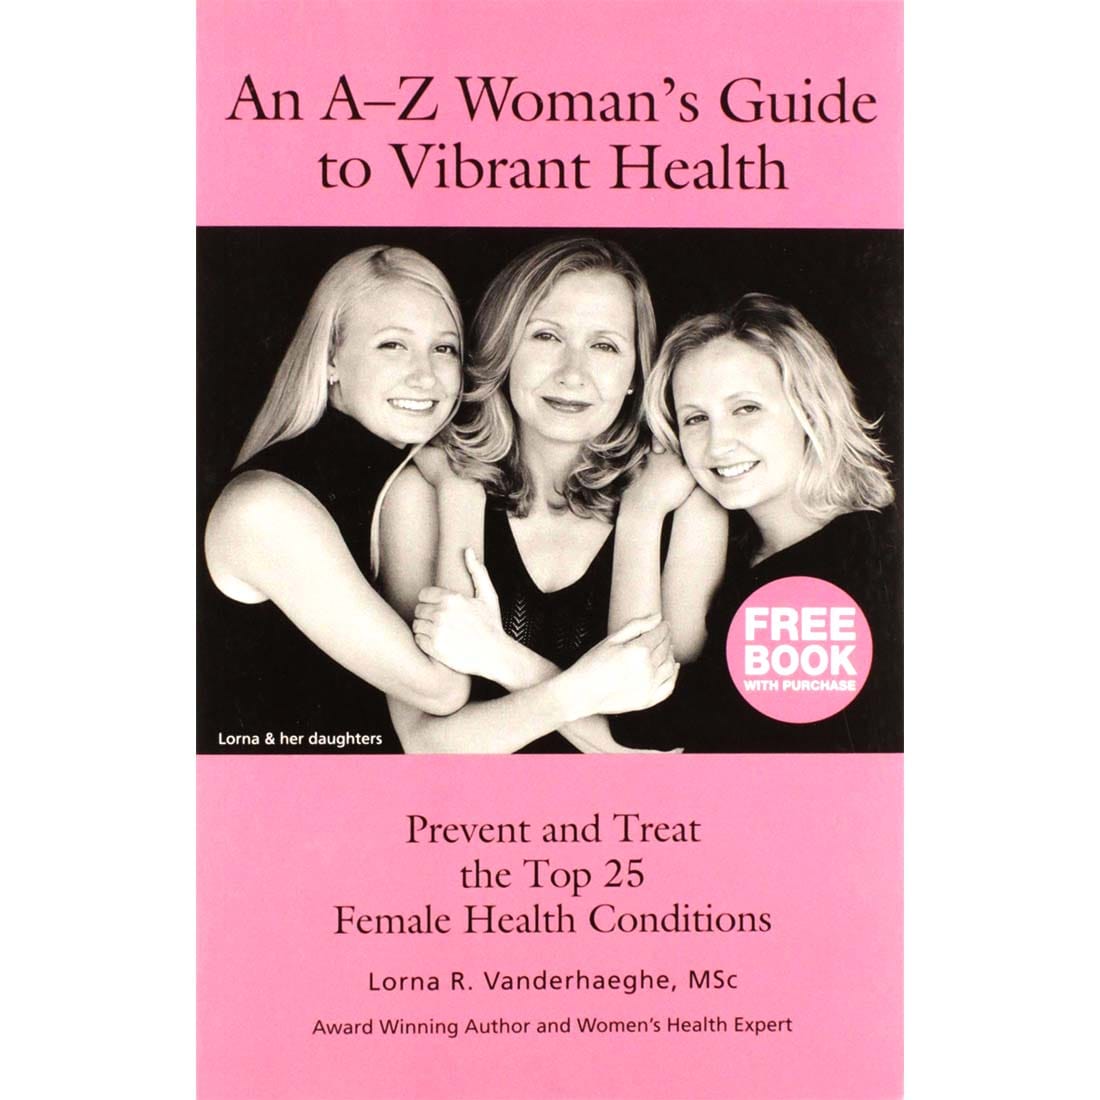 Smart Solutions A-Z Woman's Guide to Vibrant Health Book by Lorna Vanderhaeghe, MS